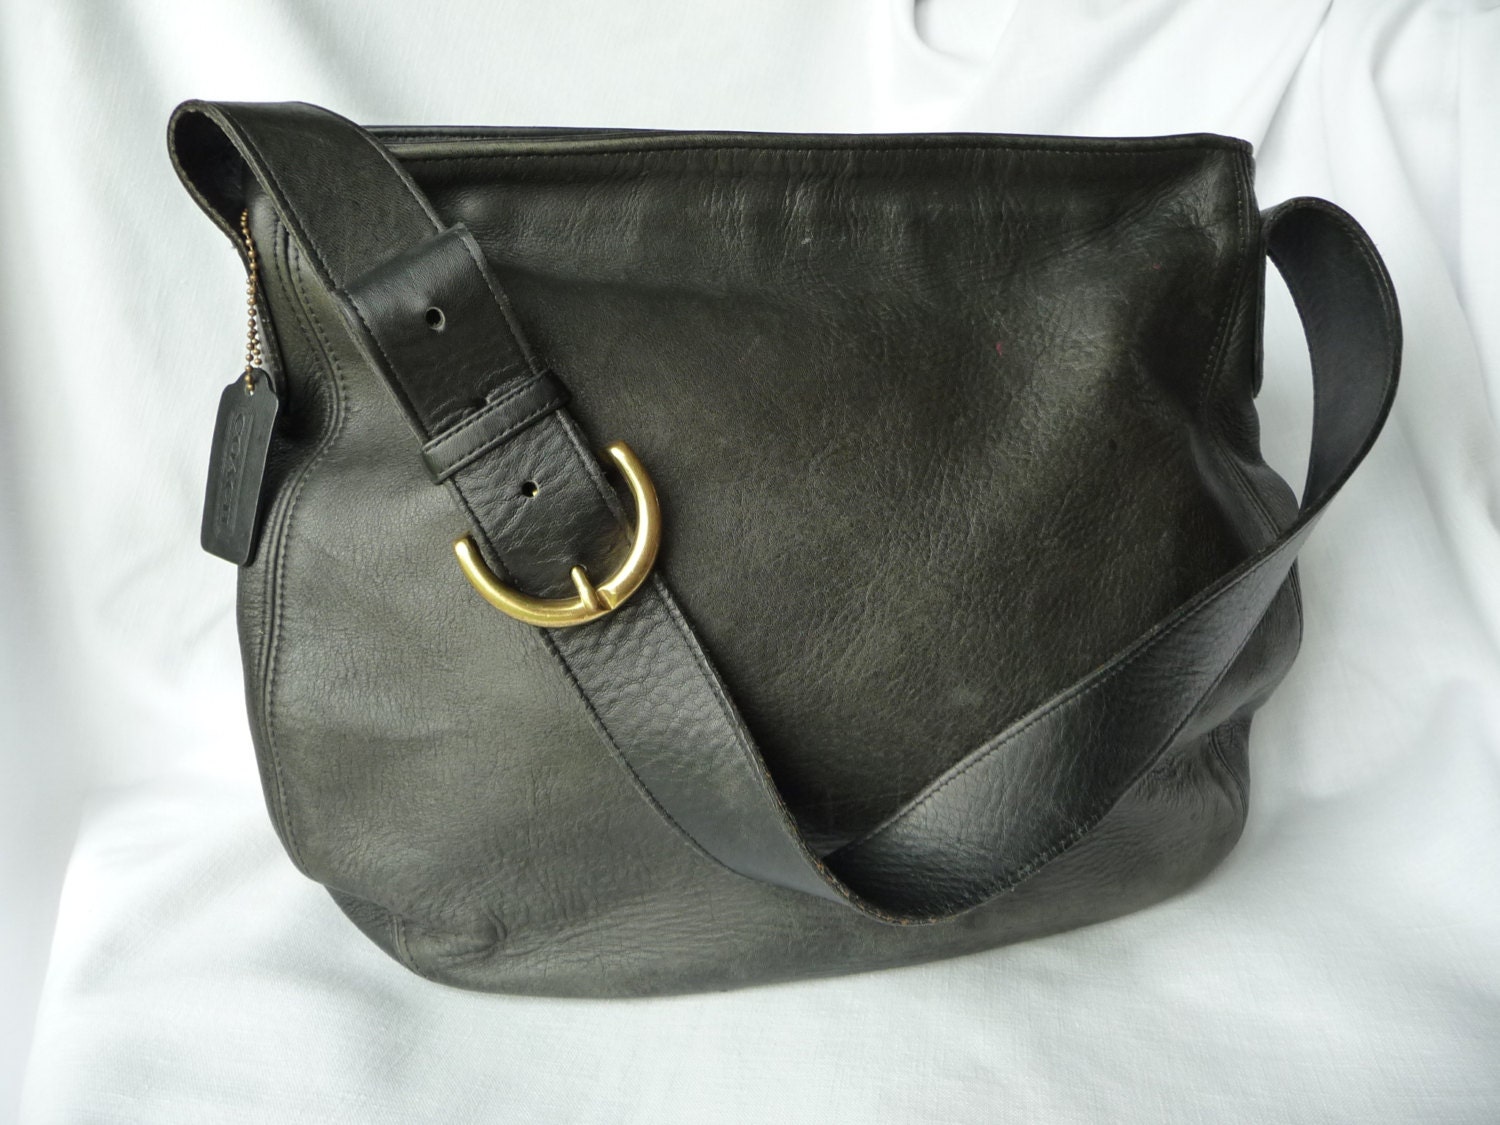 Vintage COACH Waverly Bucket Tote Bag in Black Pebbled Leather